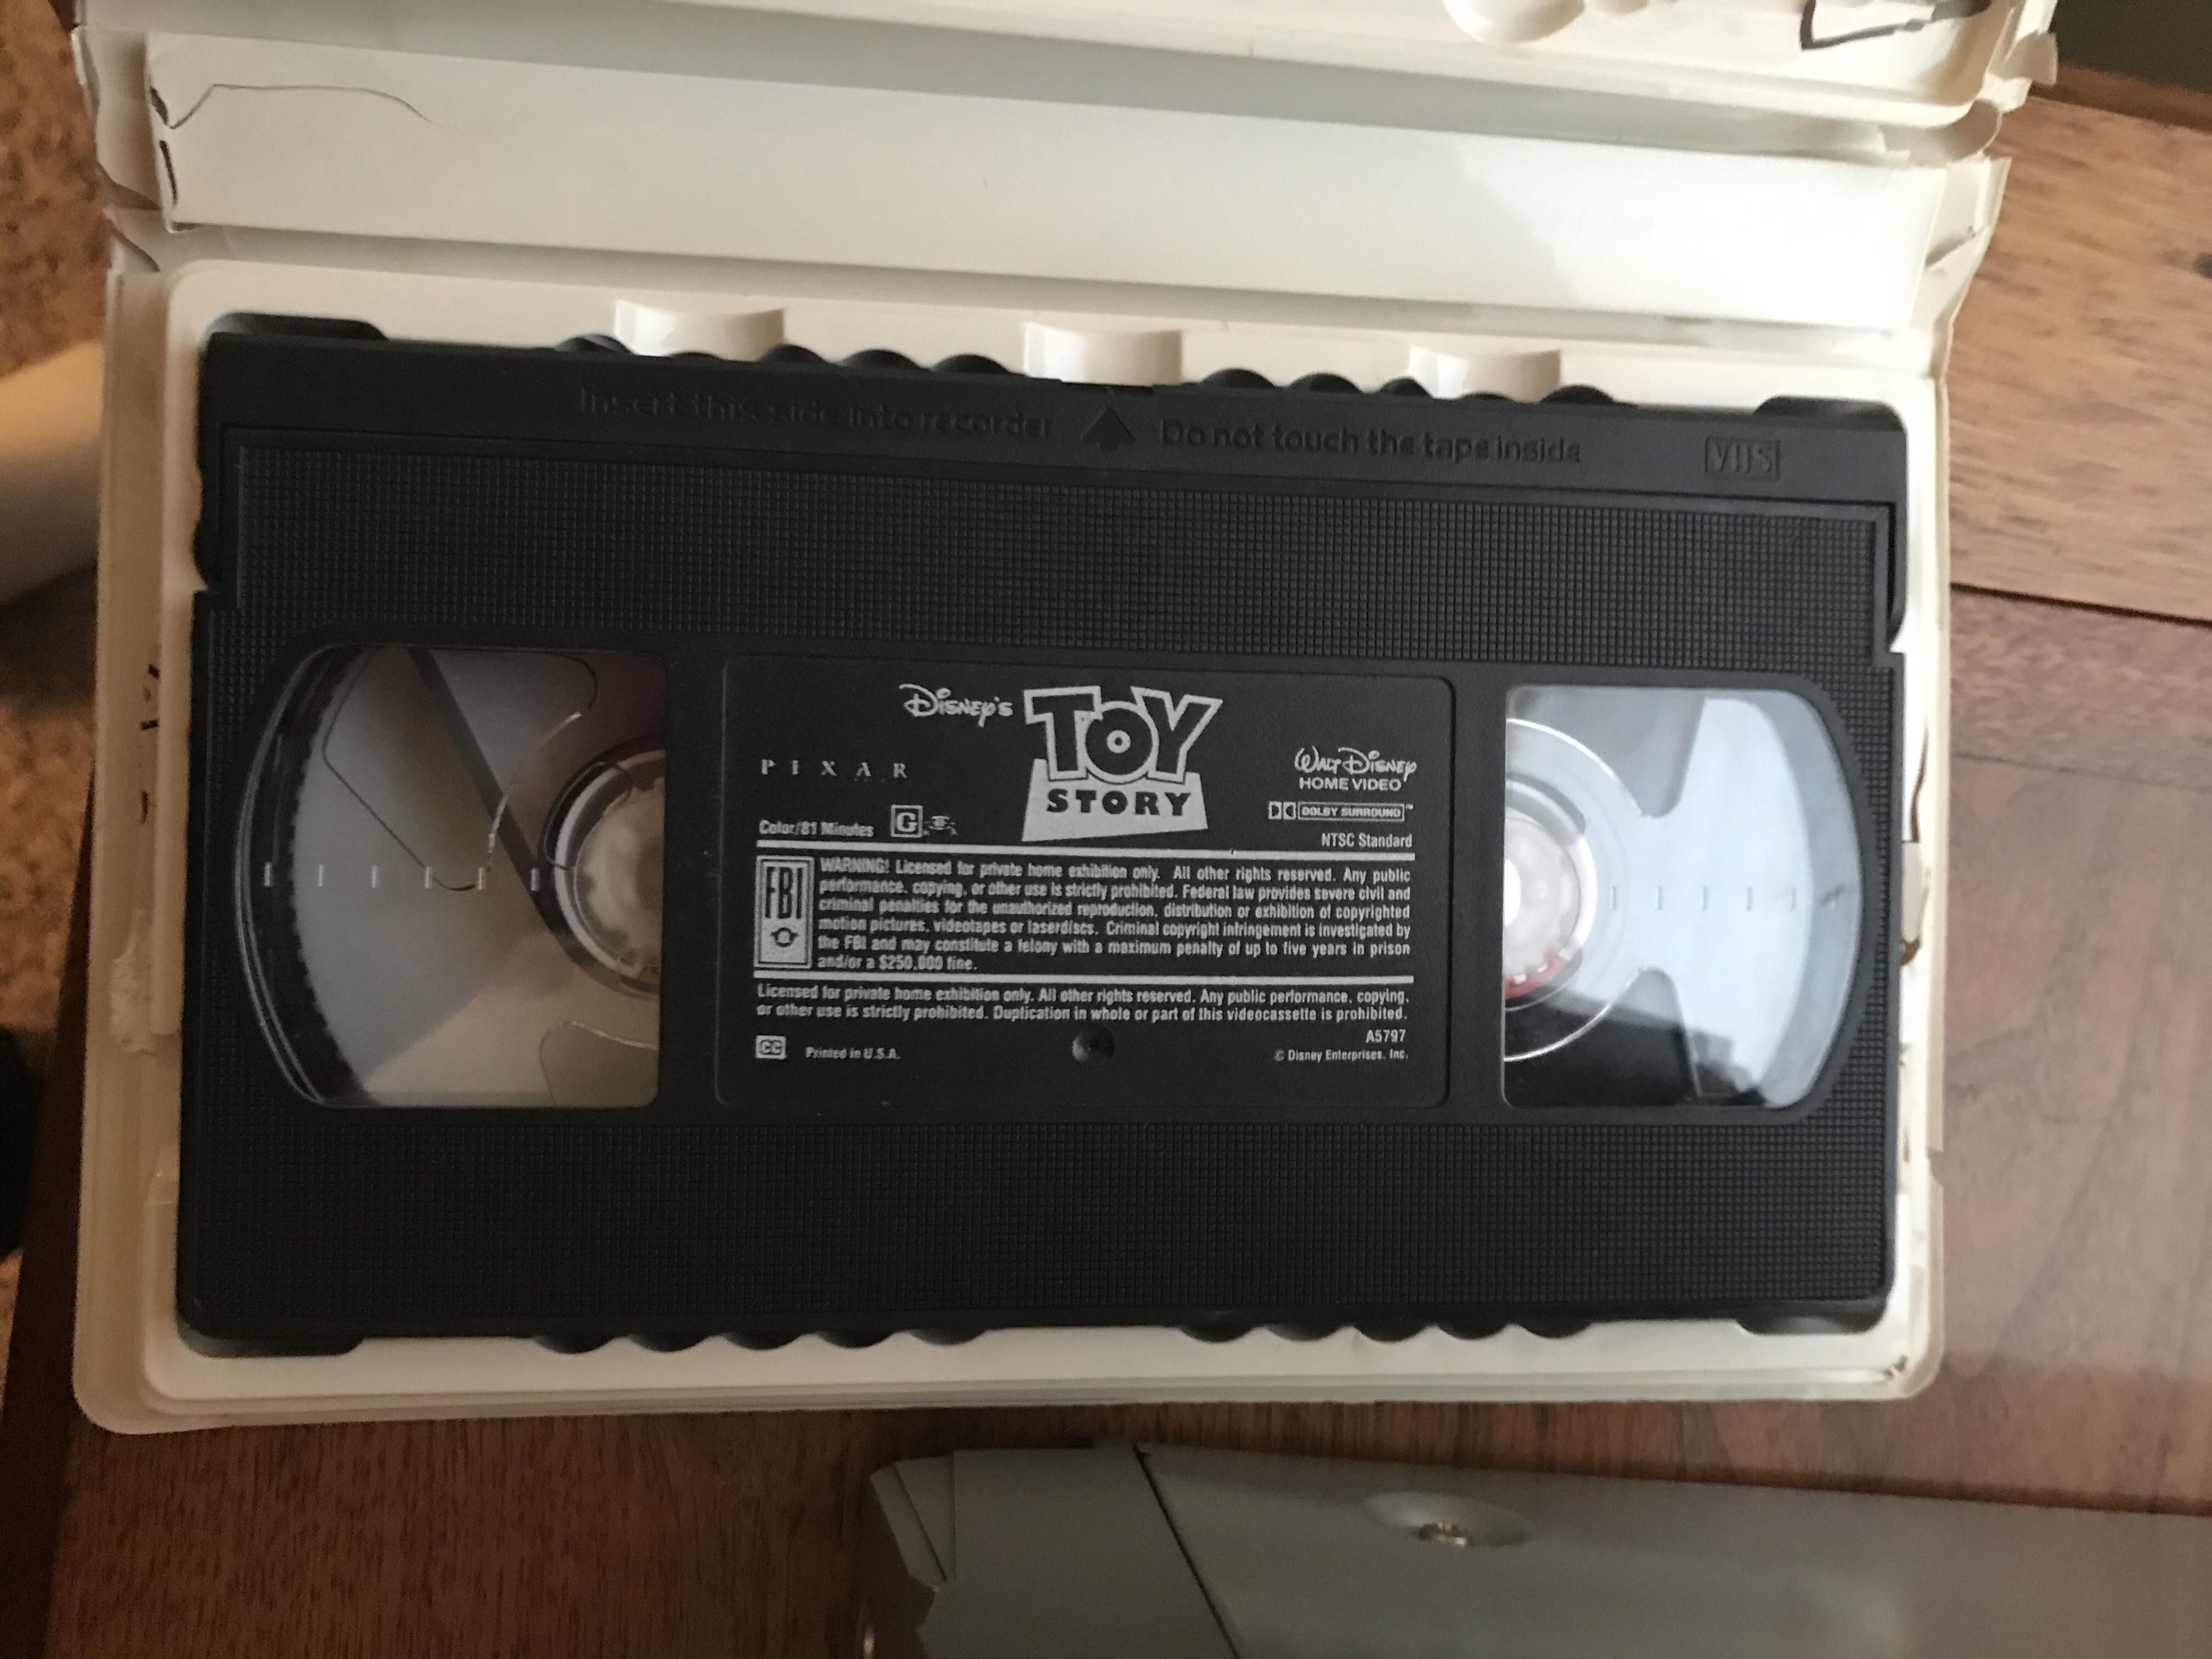 We’re staying in a rental house at the beach. My son comes running out of his room all excited saying, “Daddy, we have an OLD DVD player in our room!!!” And then hands me this: